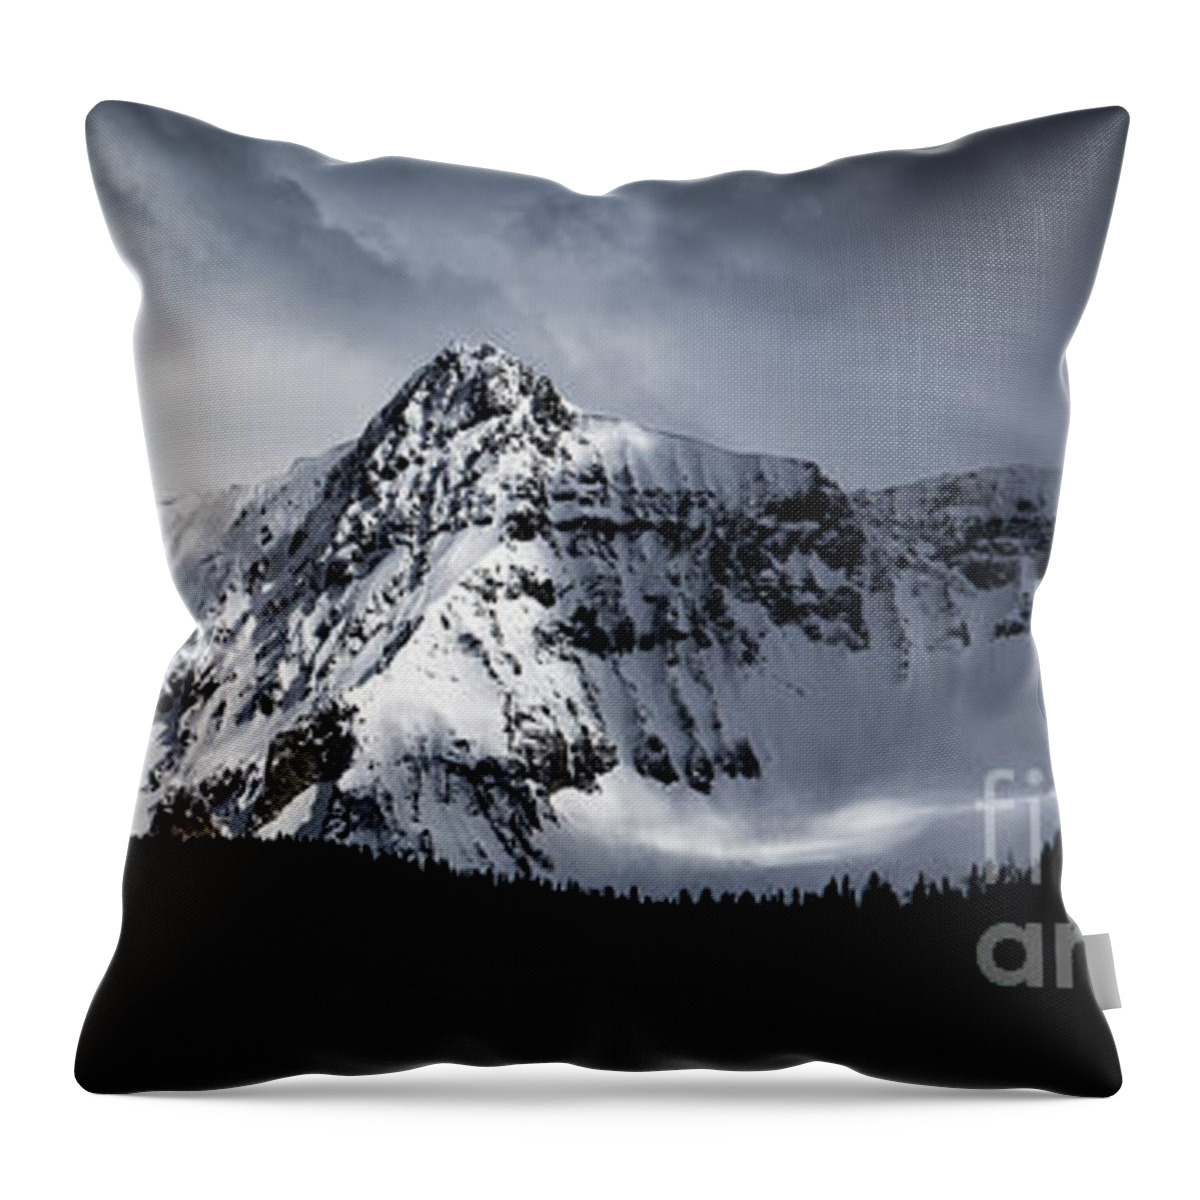 Mountains Throw Pillow featuring the photograph Cold Spring - San Juan Mountains, Colorado by The Forests Edge Photography - Diane Sandoval